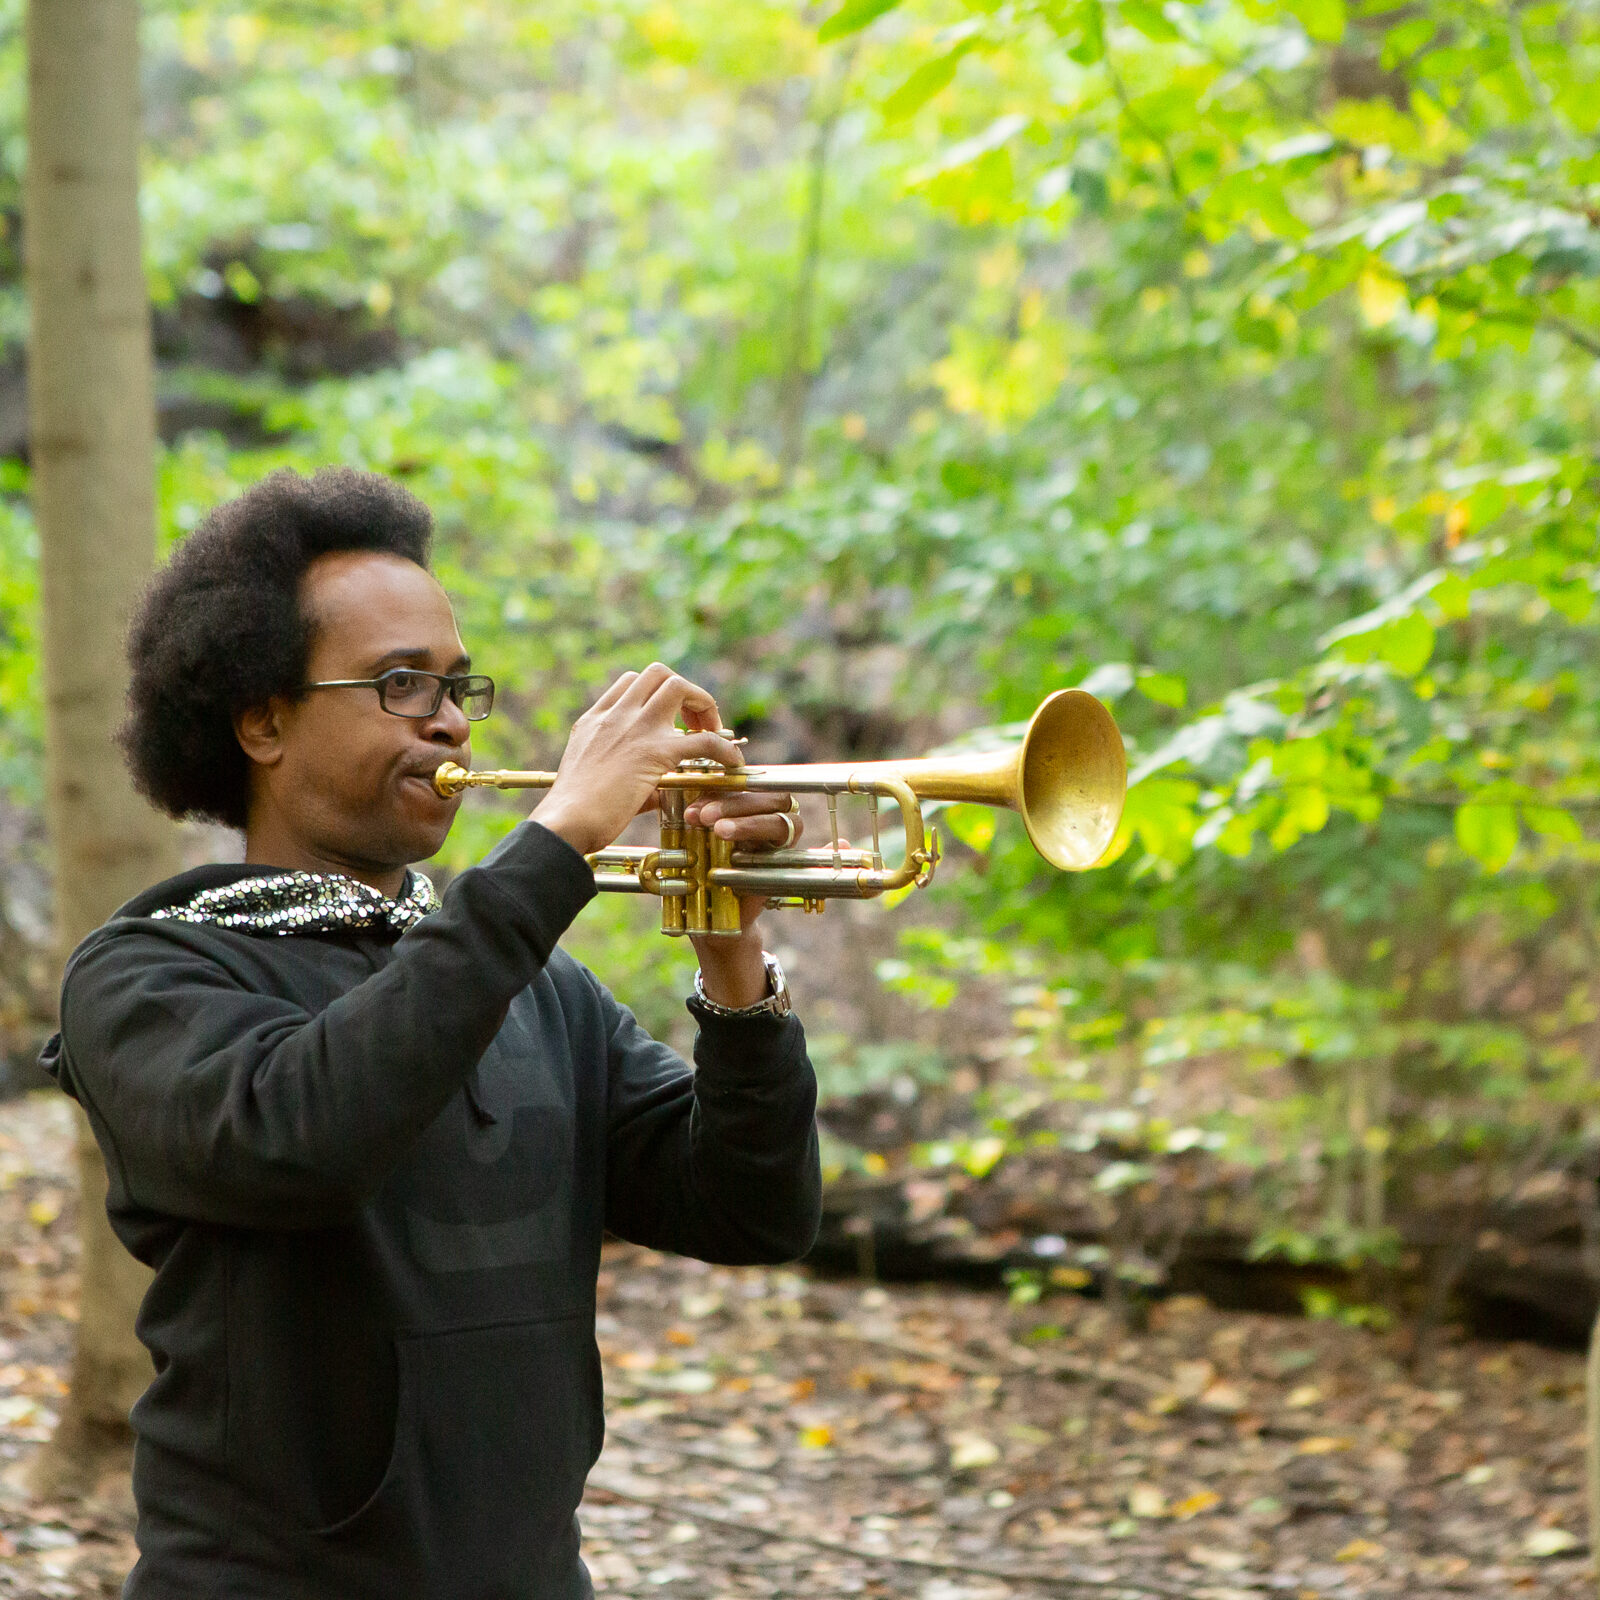 In this image, a person wearing black clothing is playing the trumpet. They are outside with green leaves and many trees in the background.